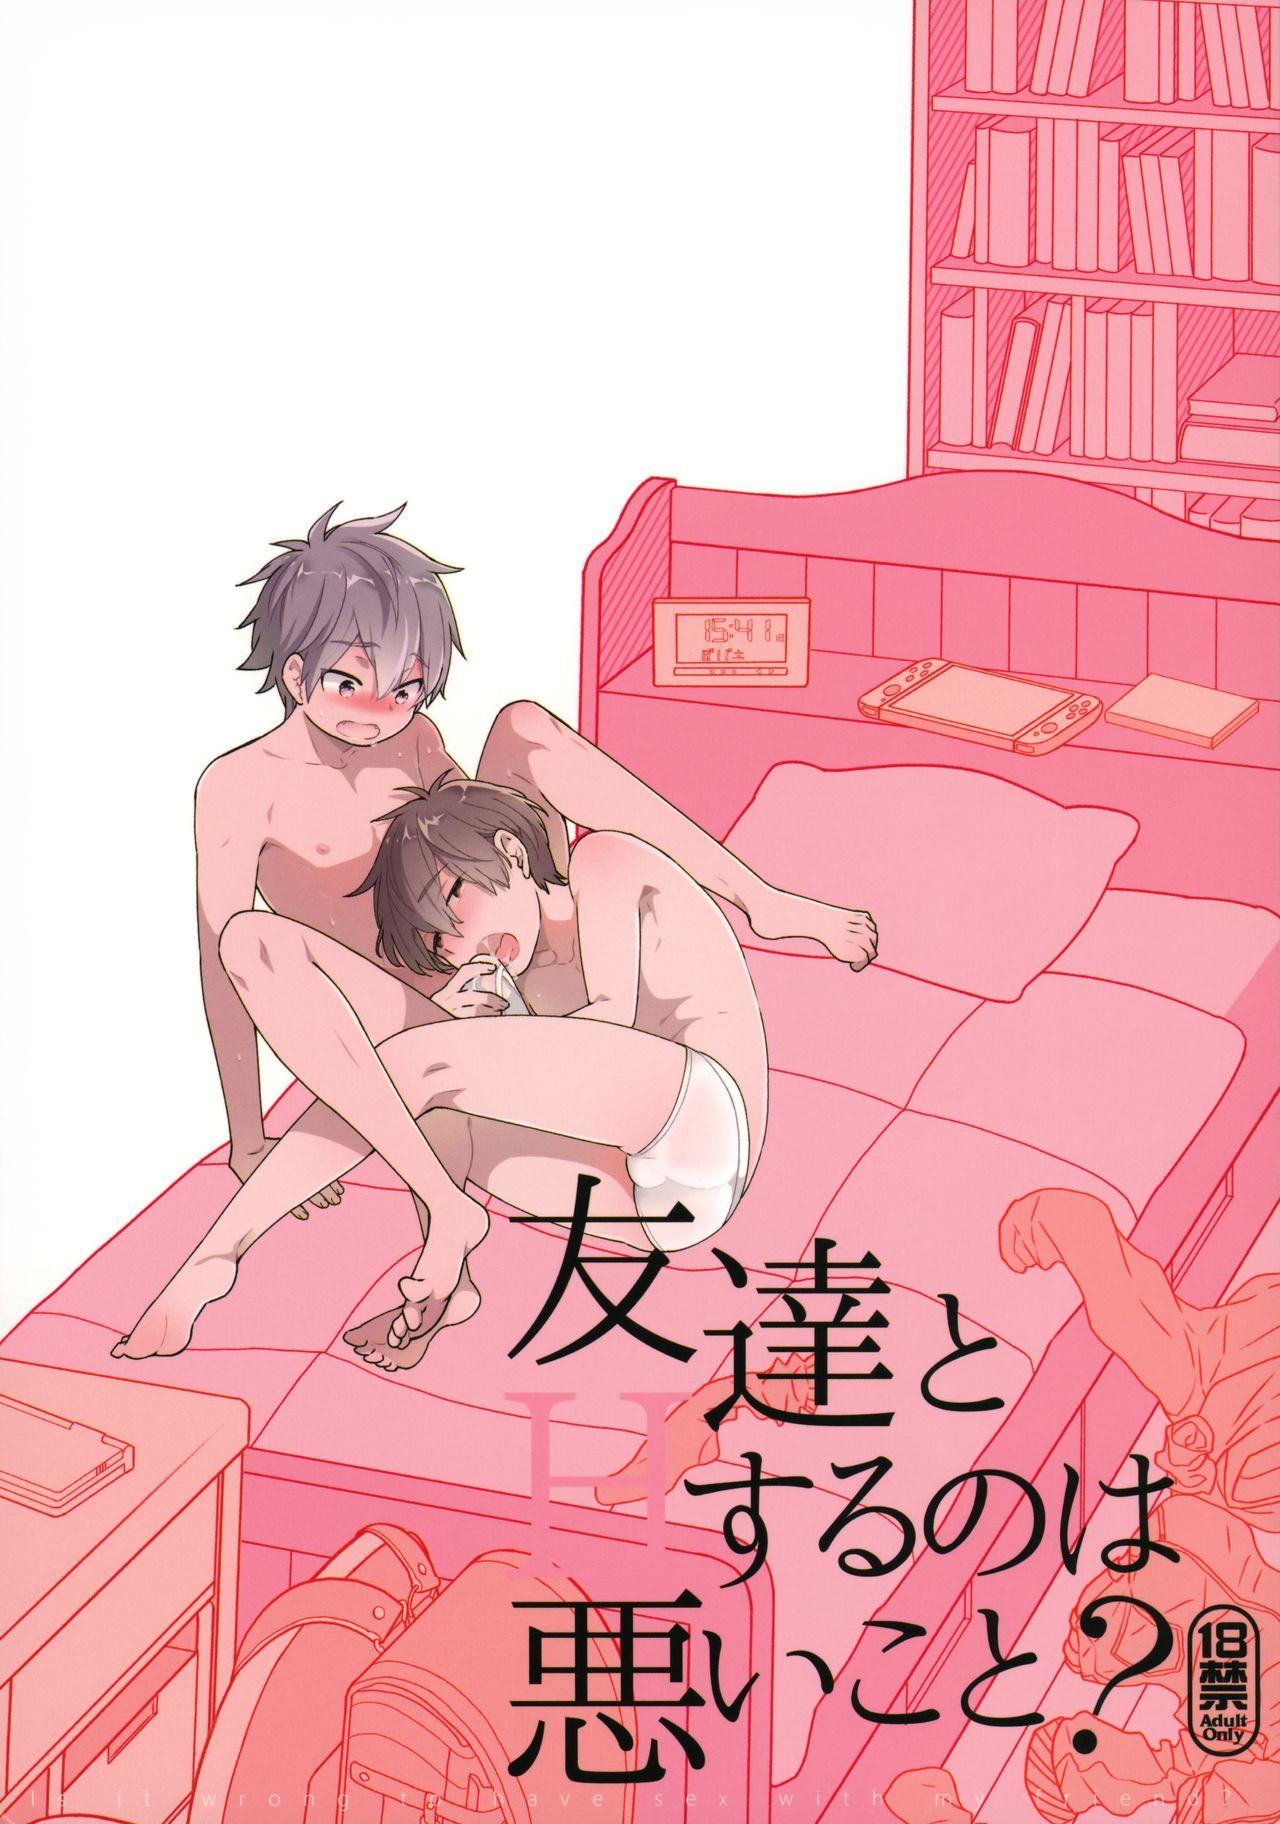 Nude Tomodachi to Suru no wa Warui Koto? - Is it wrong to have sex with my friend? - Original Pervert - Picture 1